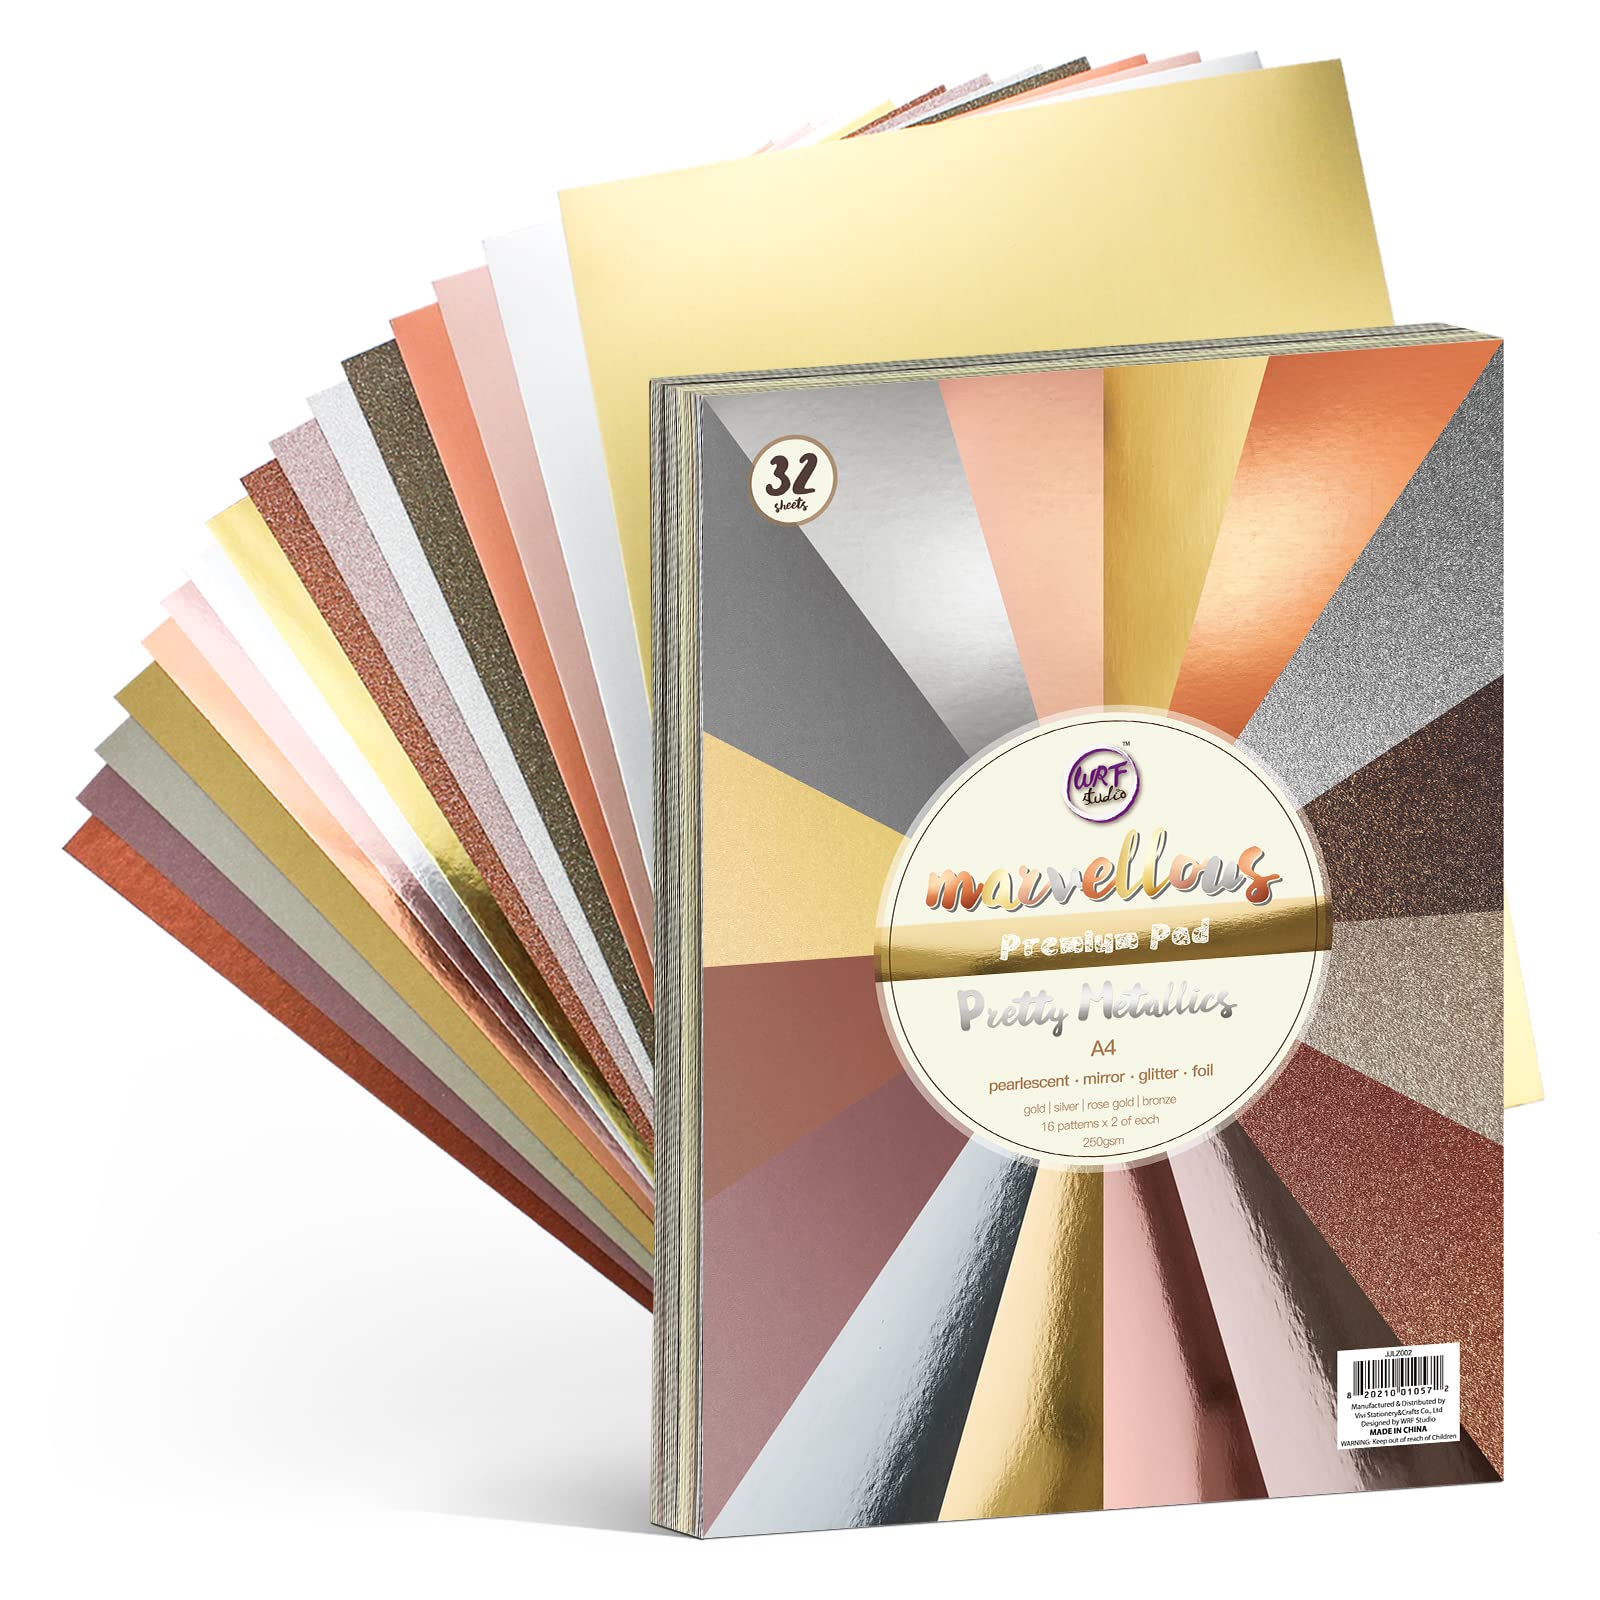 Metallic Foil On Colored Cardstock - Now Available!